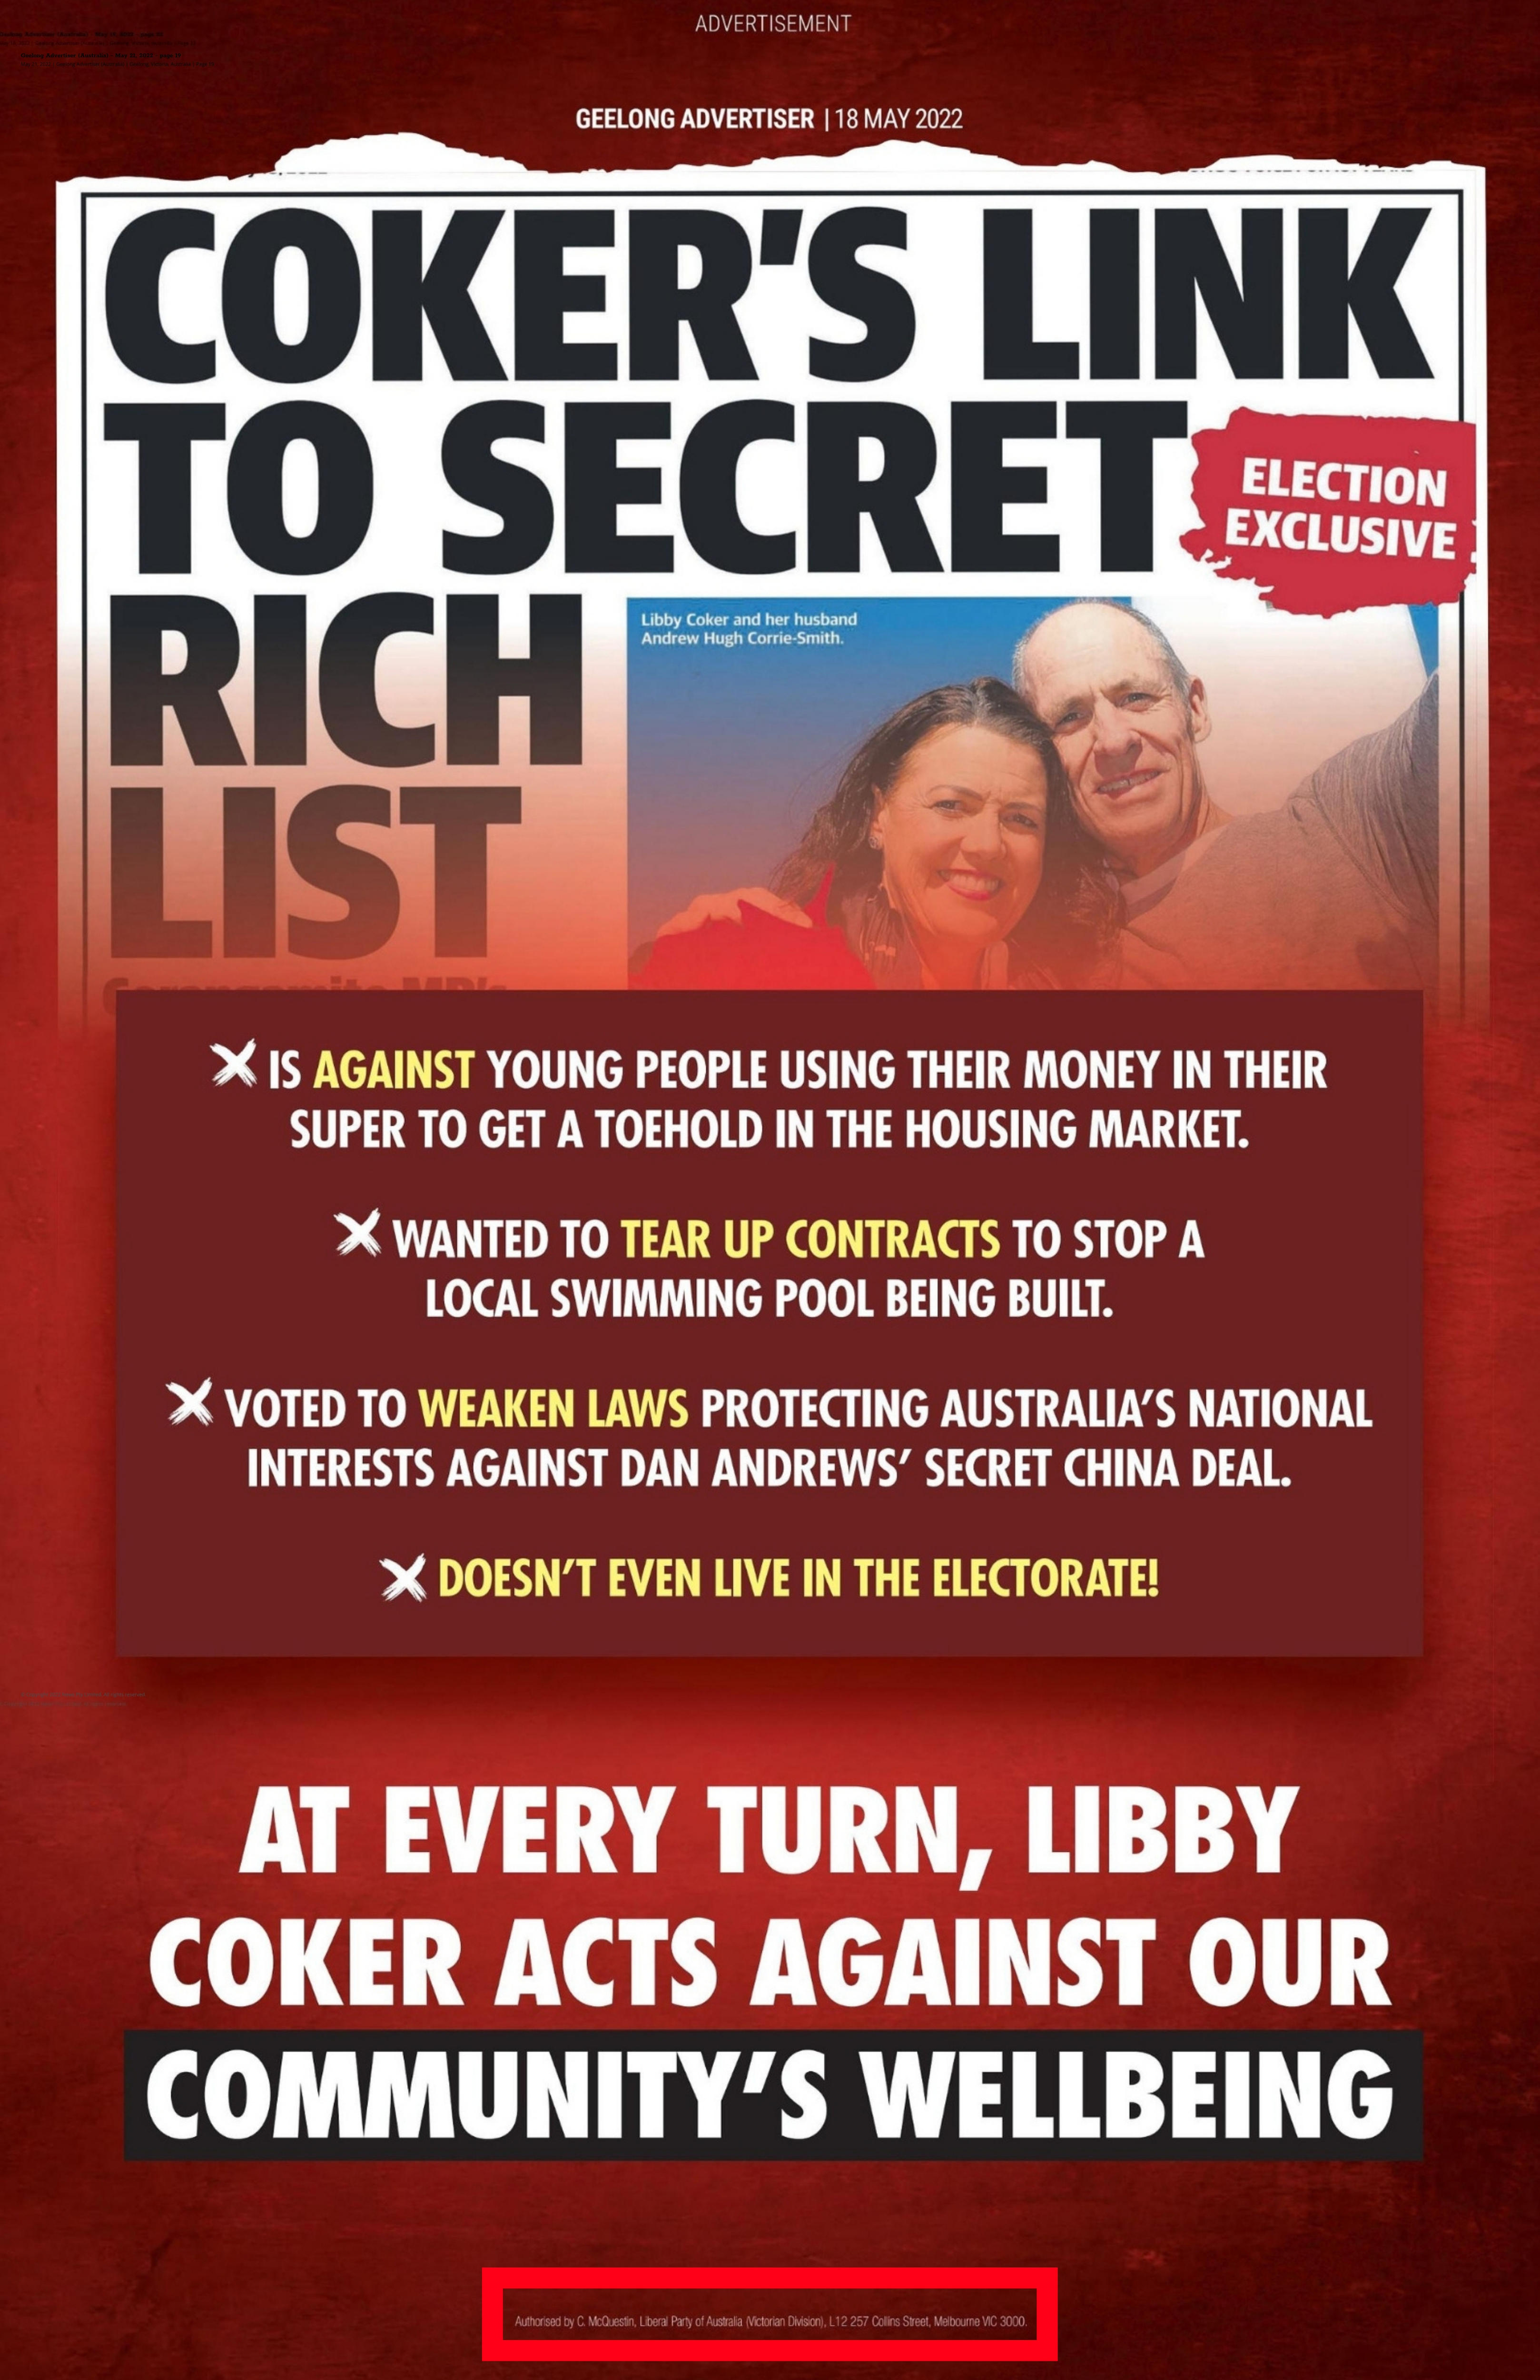 A red poster encouraging voters to vote against Libby Croker.